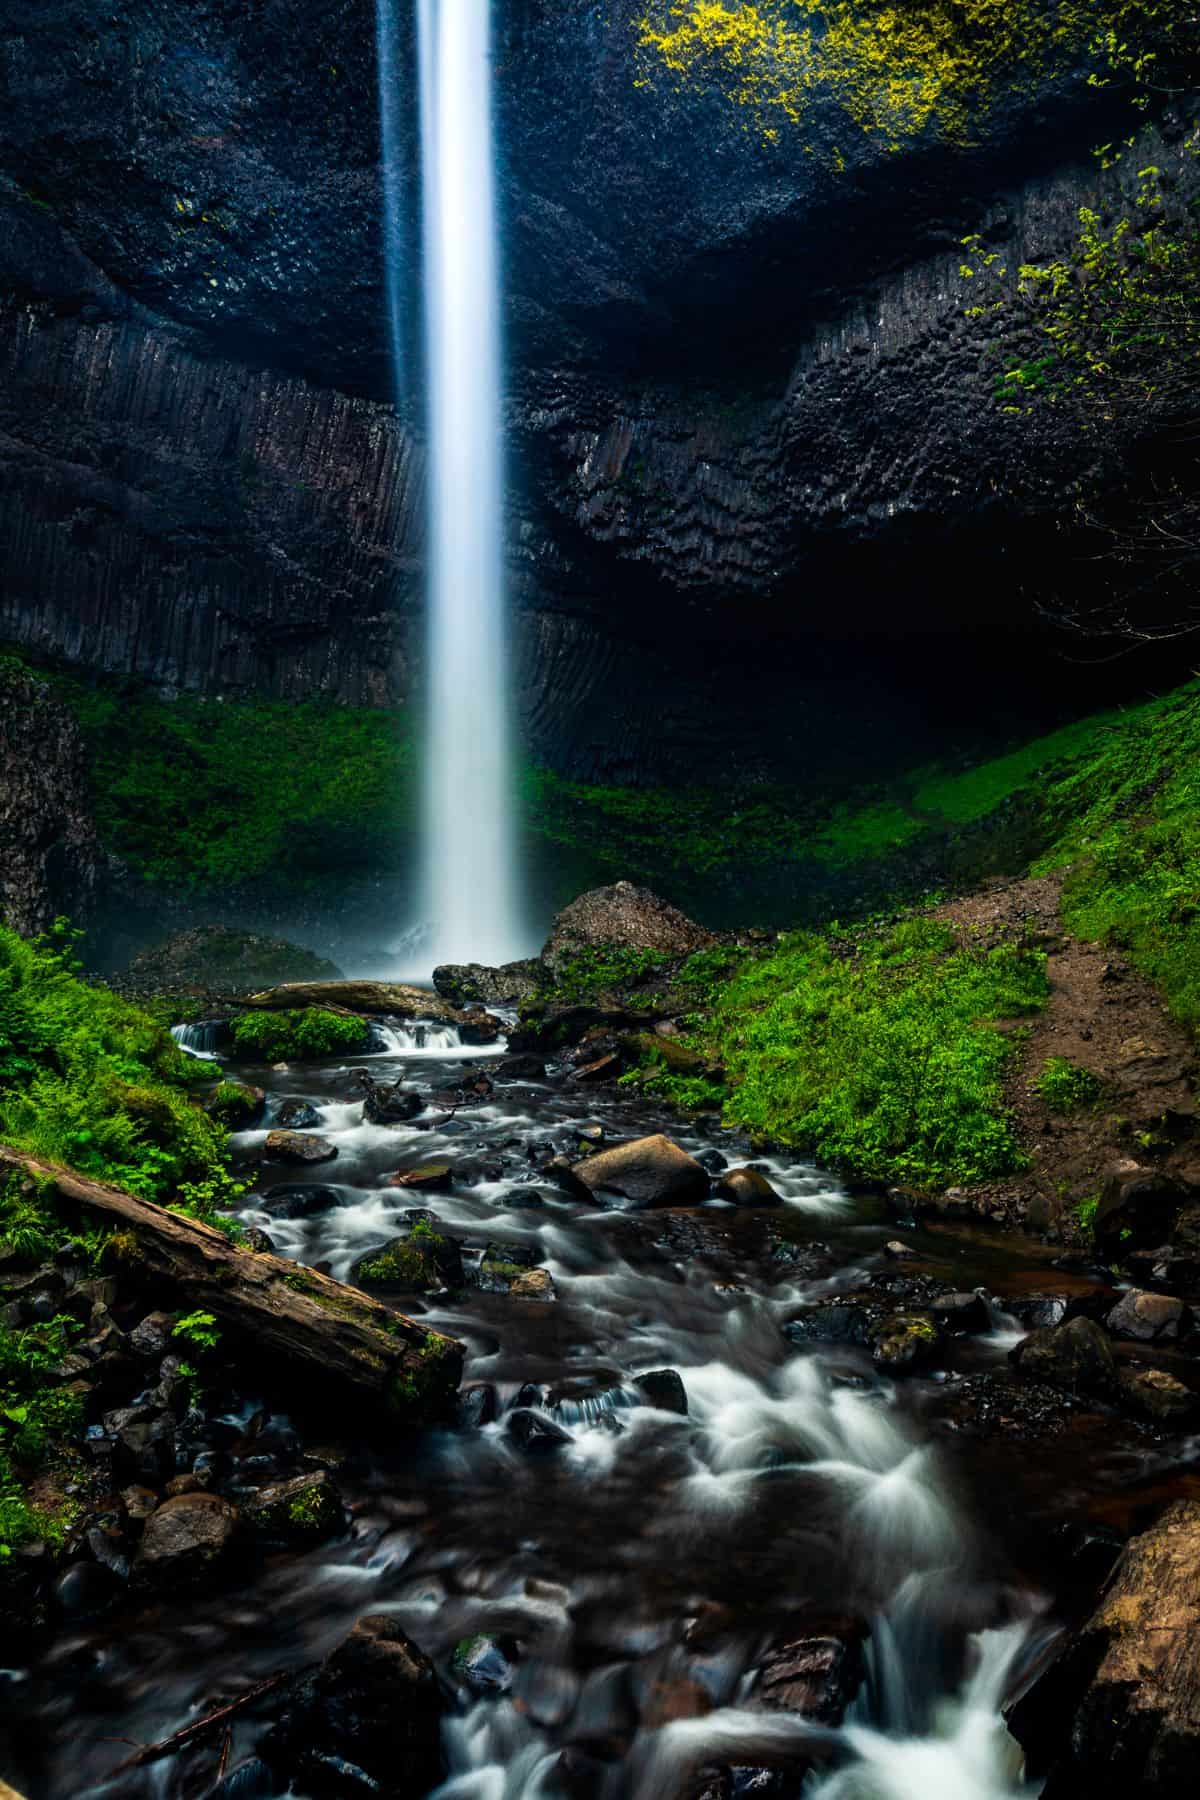 Latourell Falls is a must-photograph spot in Oregon.